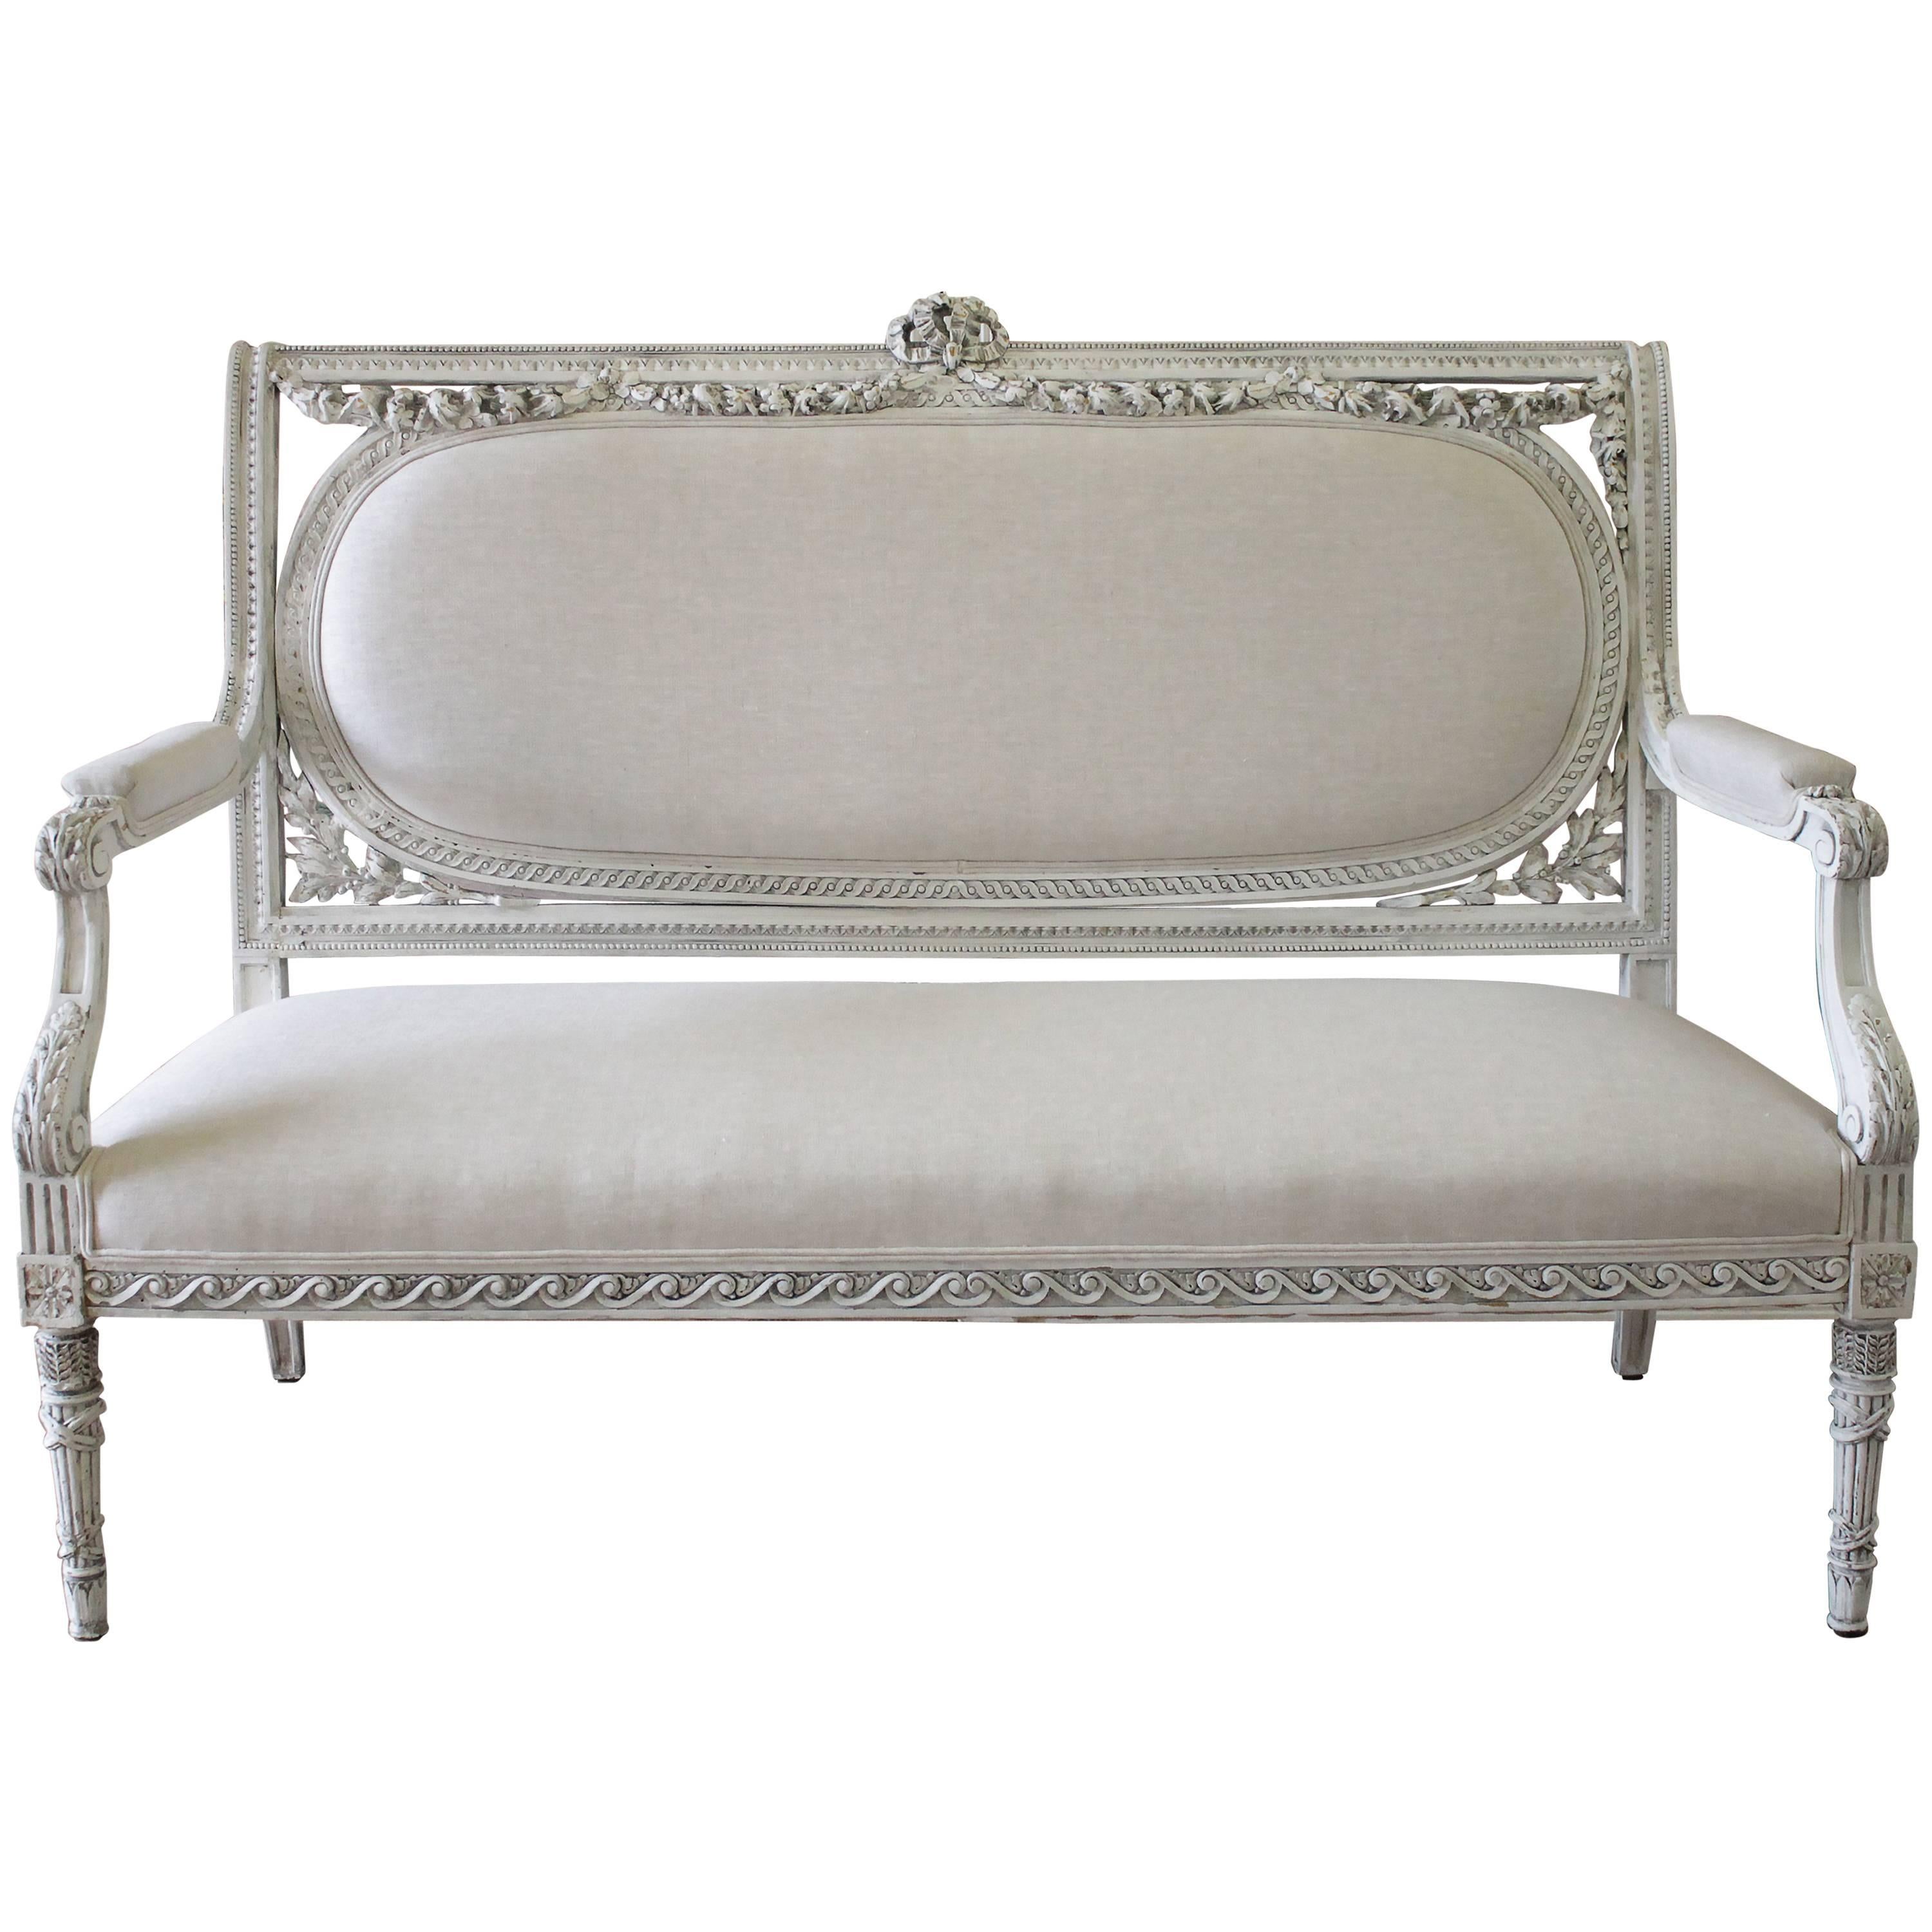 Antique French Louis XVI Style Loveseat Painted and Upholstered in Irish Linen